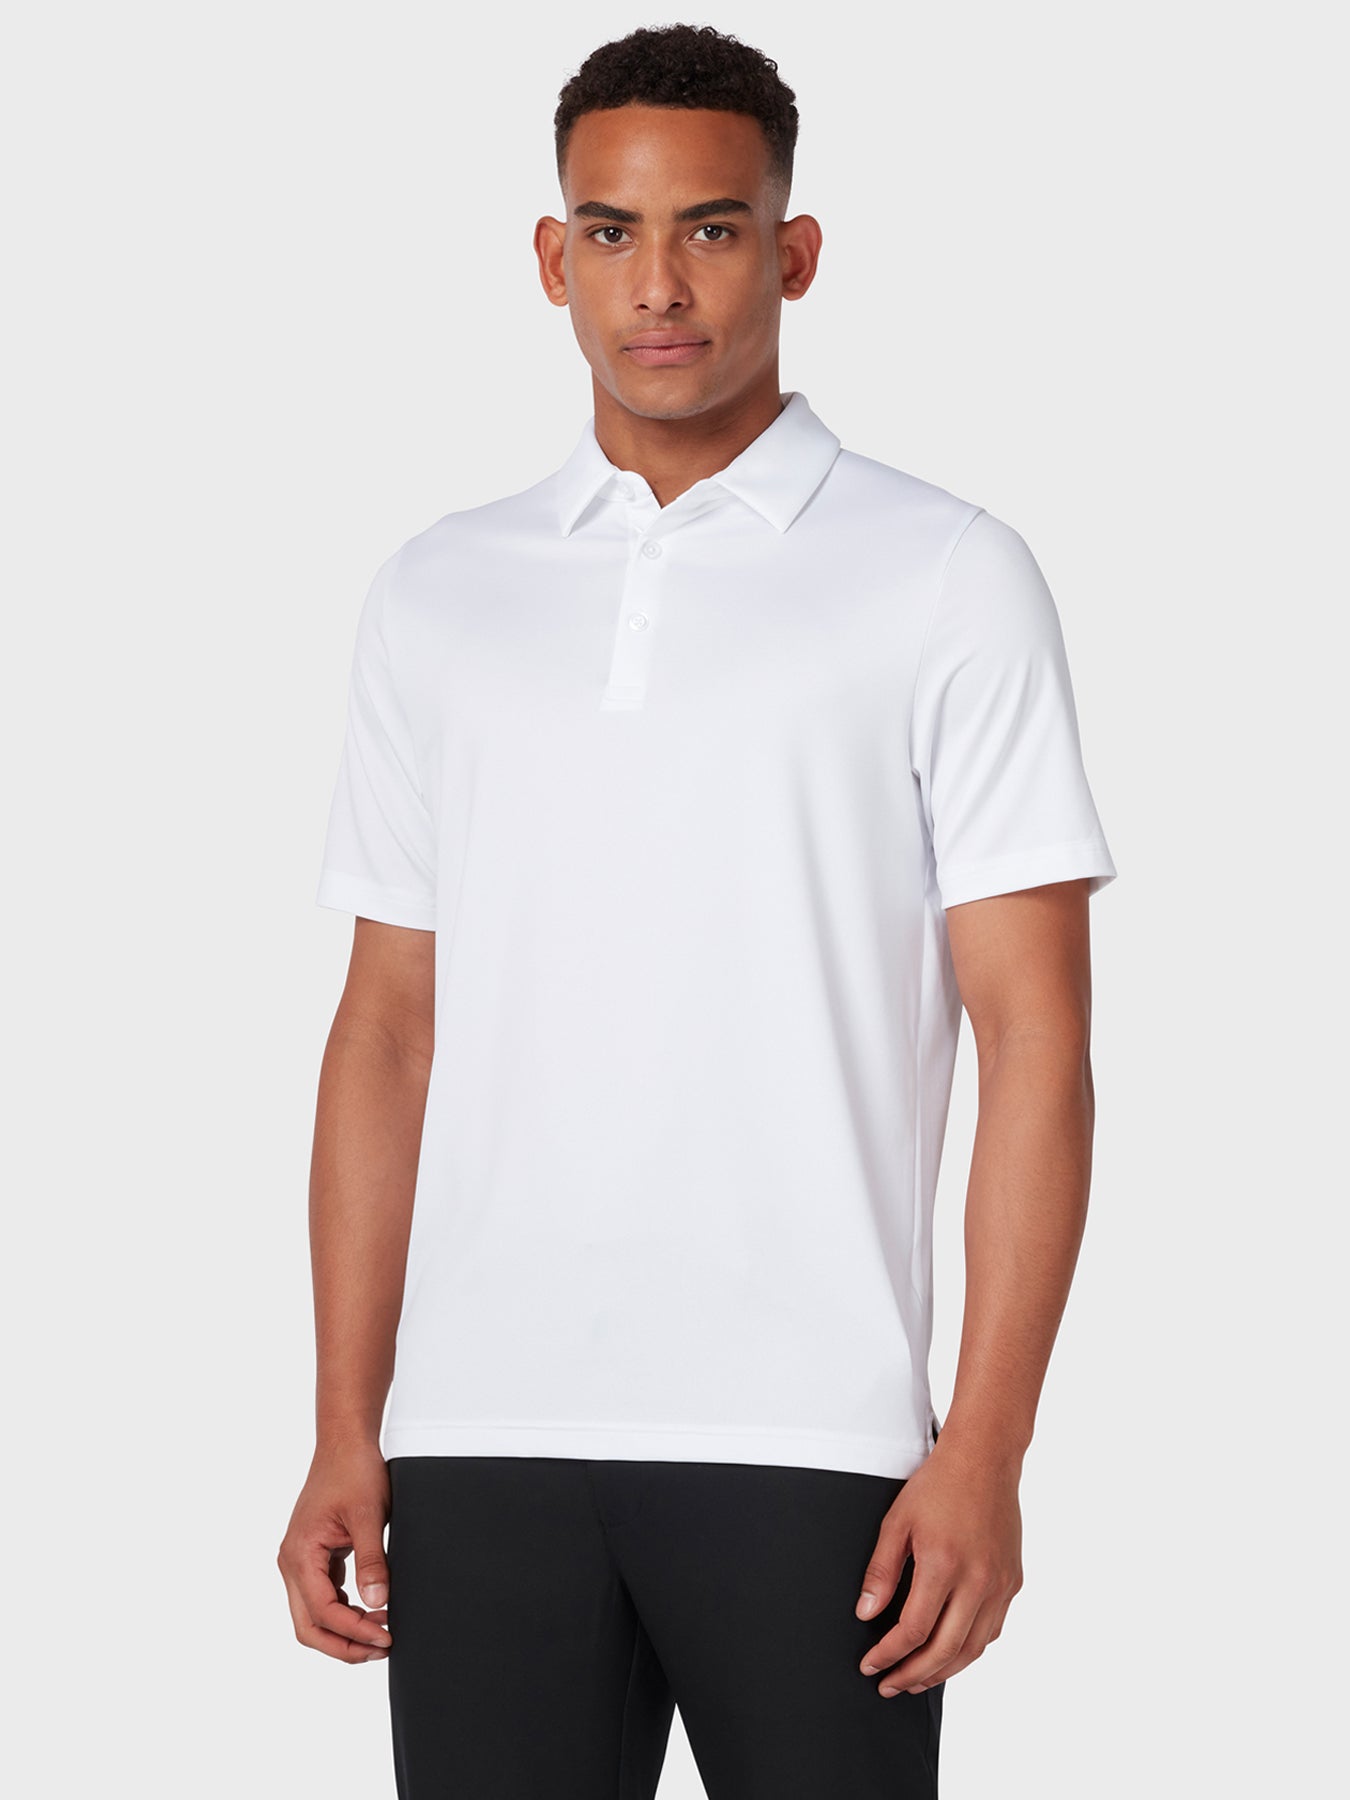 View Swing Tech Tour Polo In Bright White Bright White M information